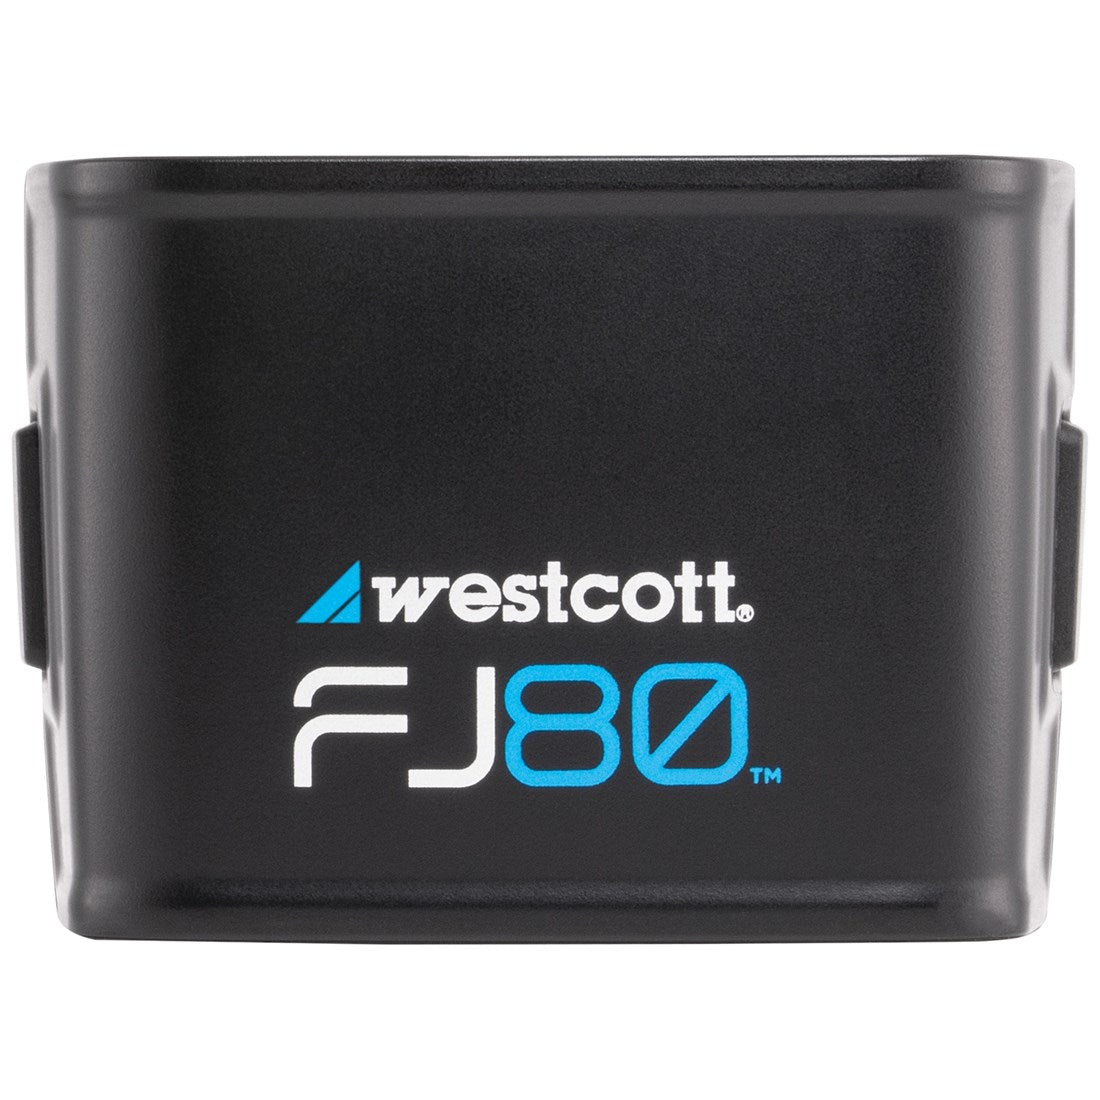 Product Image of Westcott FJ80 Lithium Polymer Rechargeable battery for the FJ80 Speedlight Flash